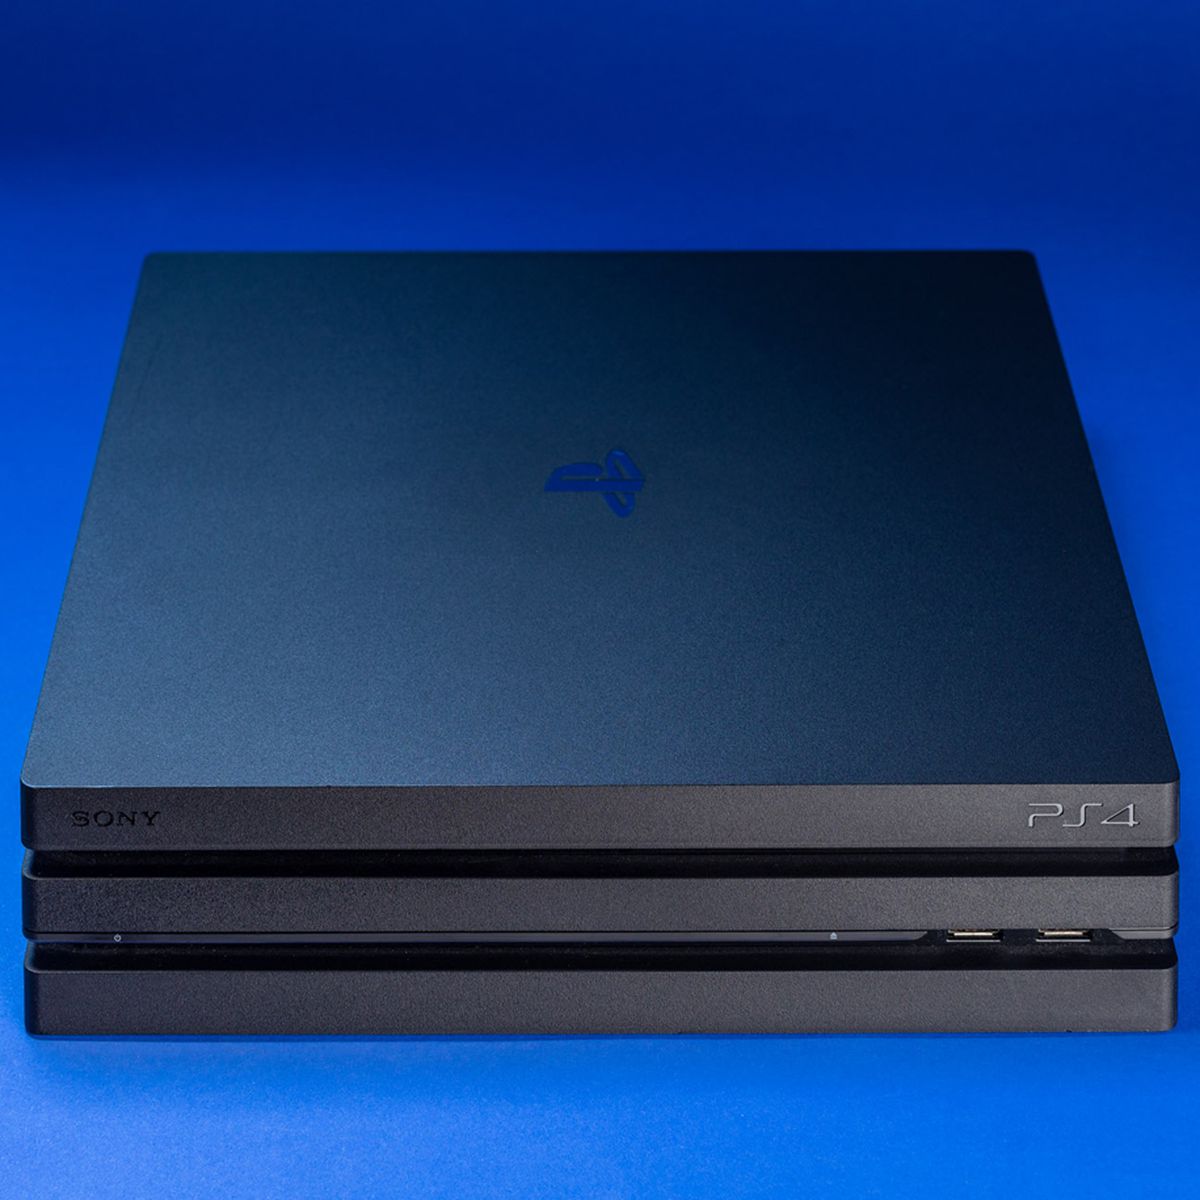 Sony PS4 Pro console on blue background